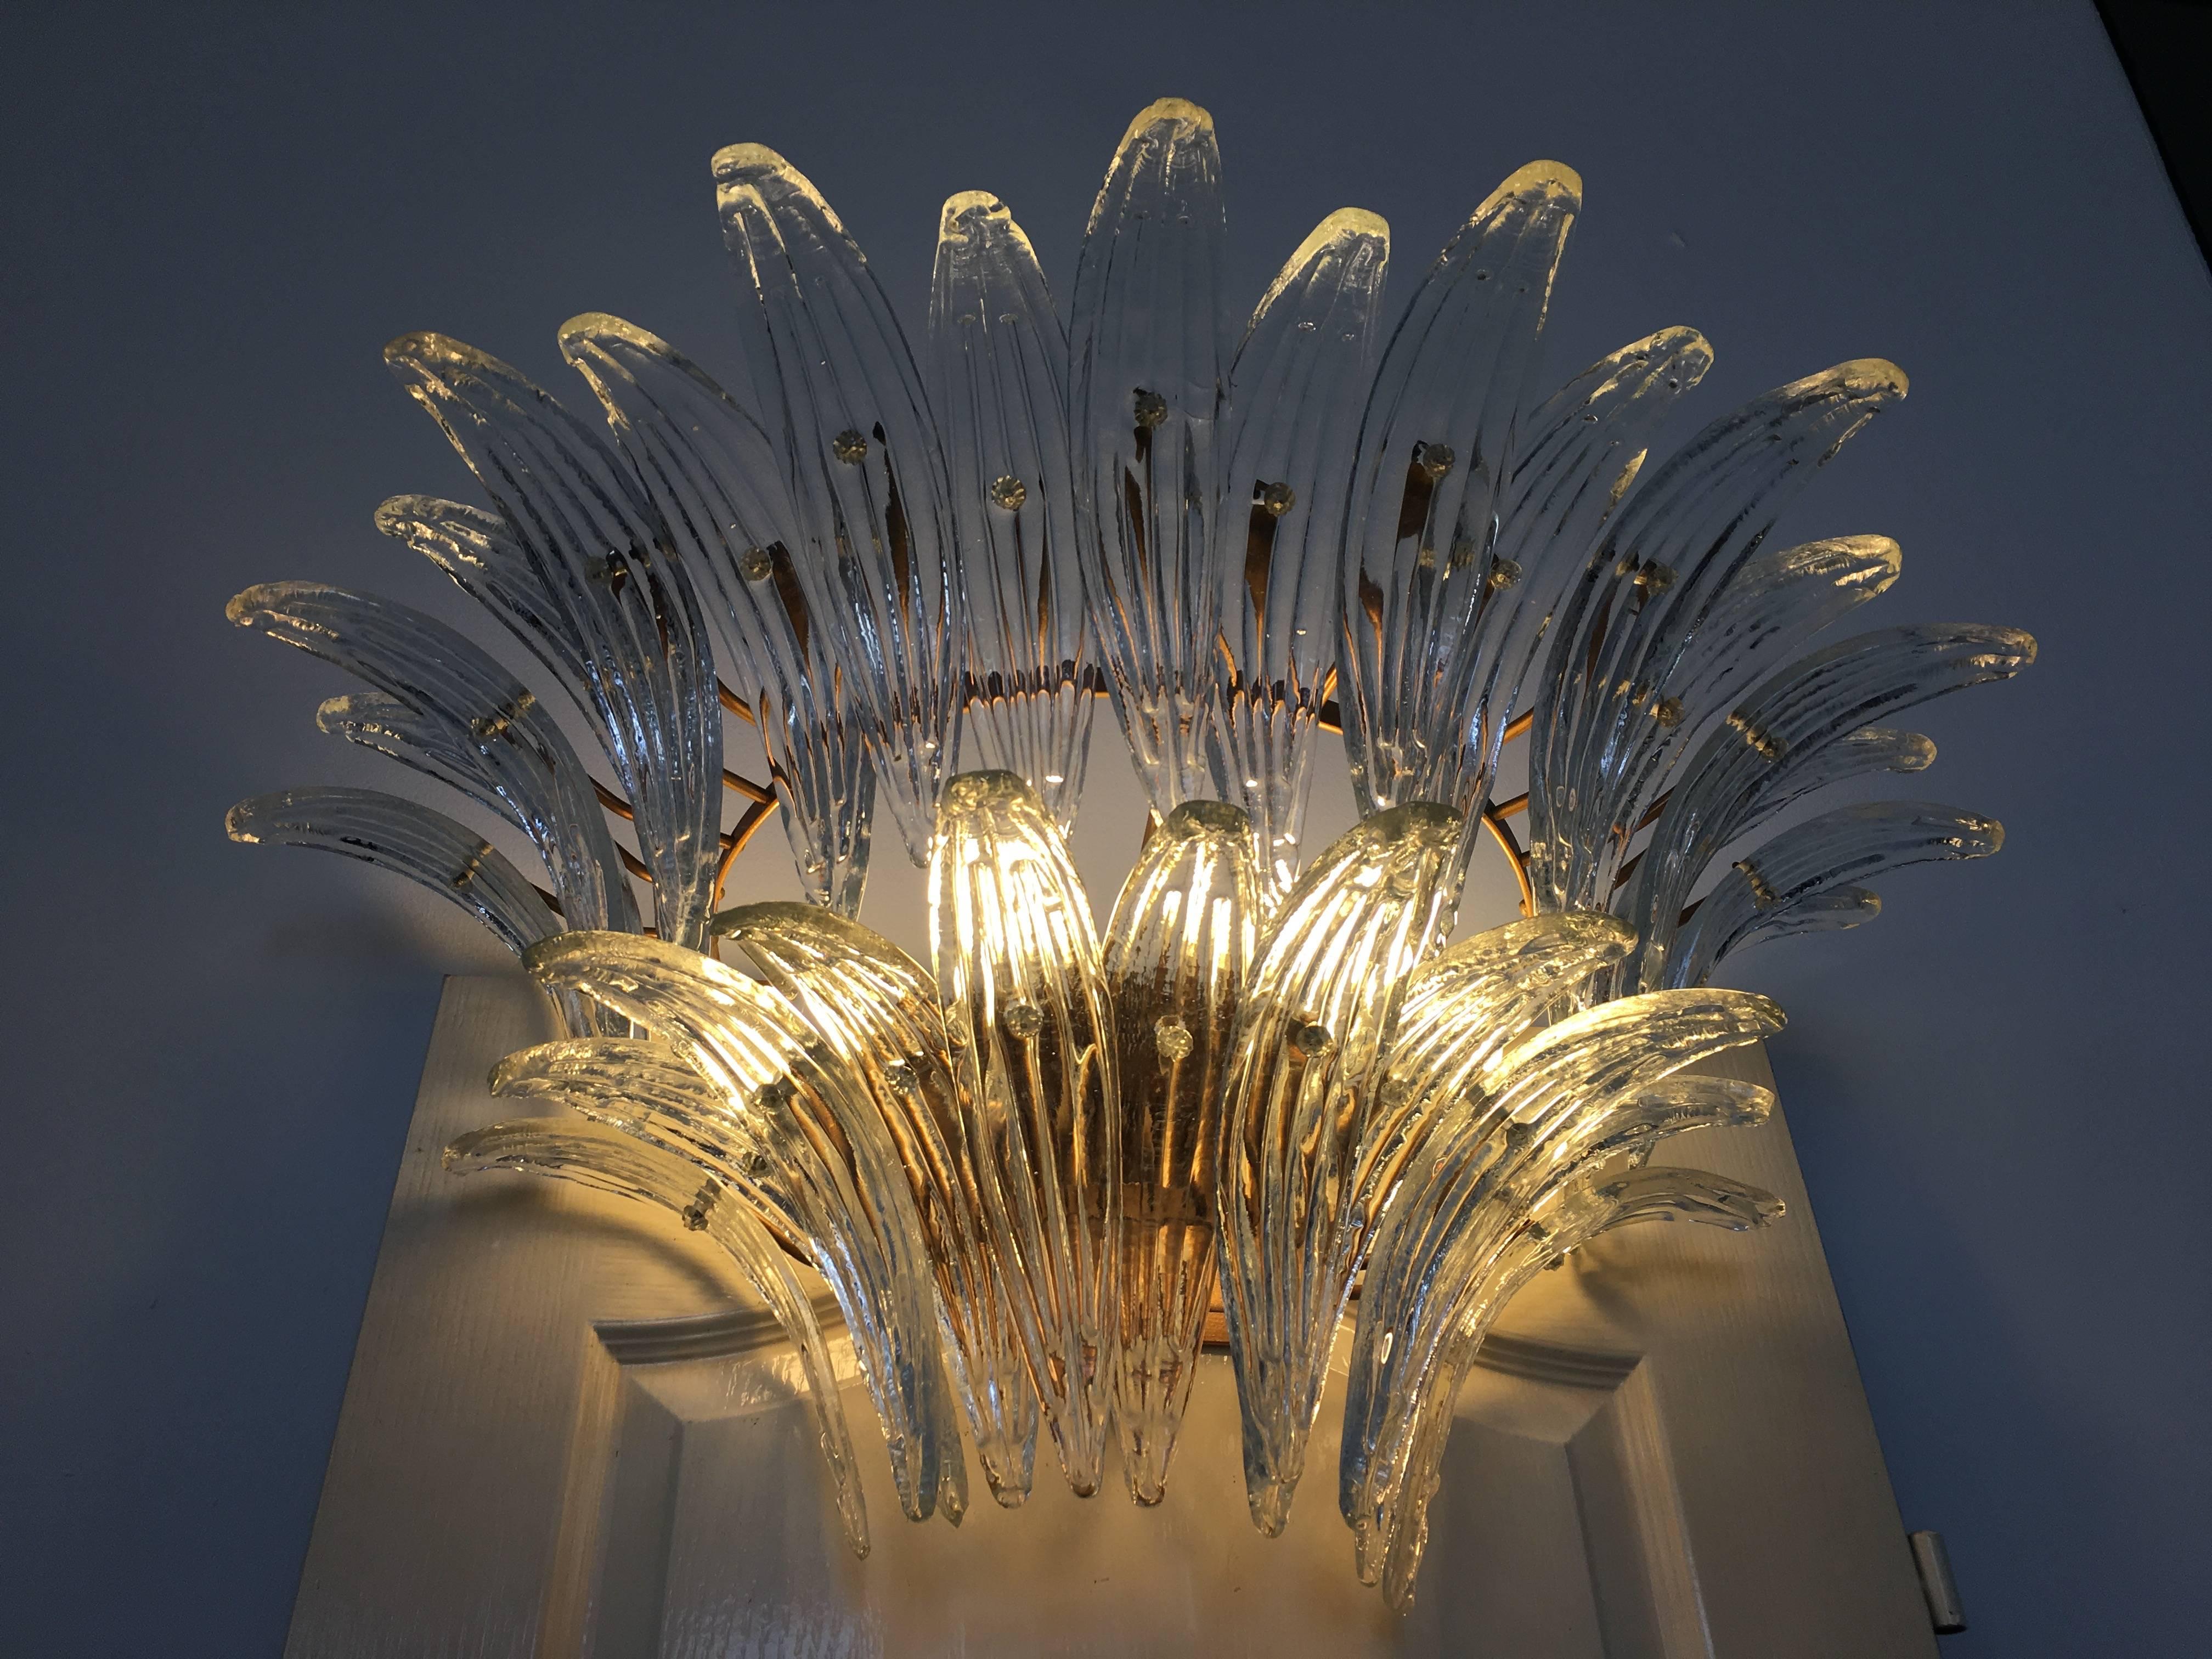 The sconces and chandeliers were located in the hall of a big hotel on the Amalfi Coast. Each individual sconce is composed by 29 large leaves in pure Murano glass. Available two pairs of sconces and original chandelier.